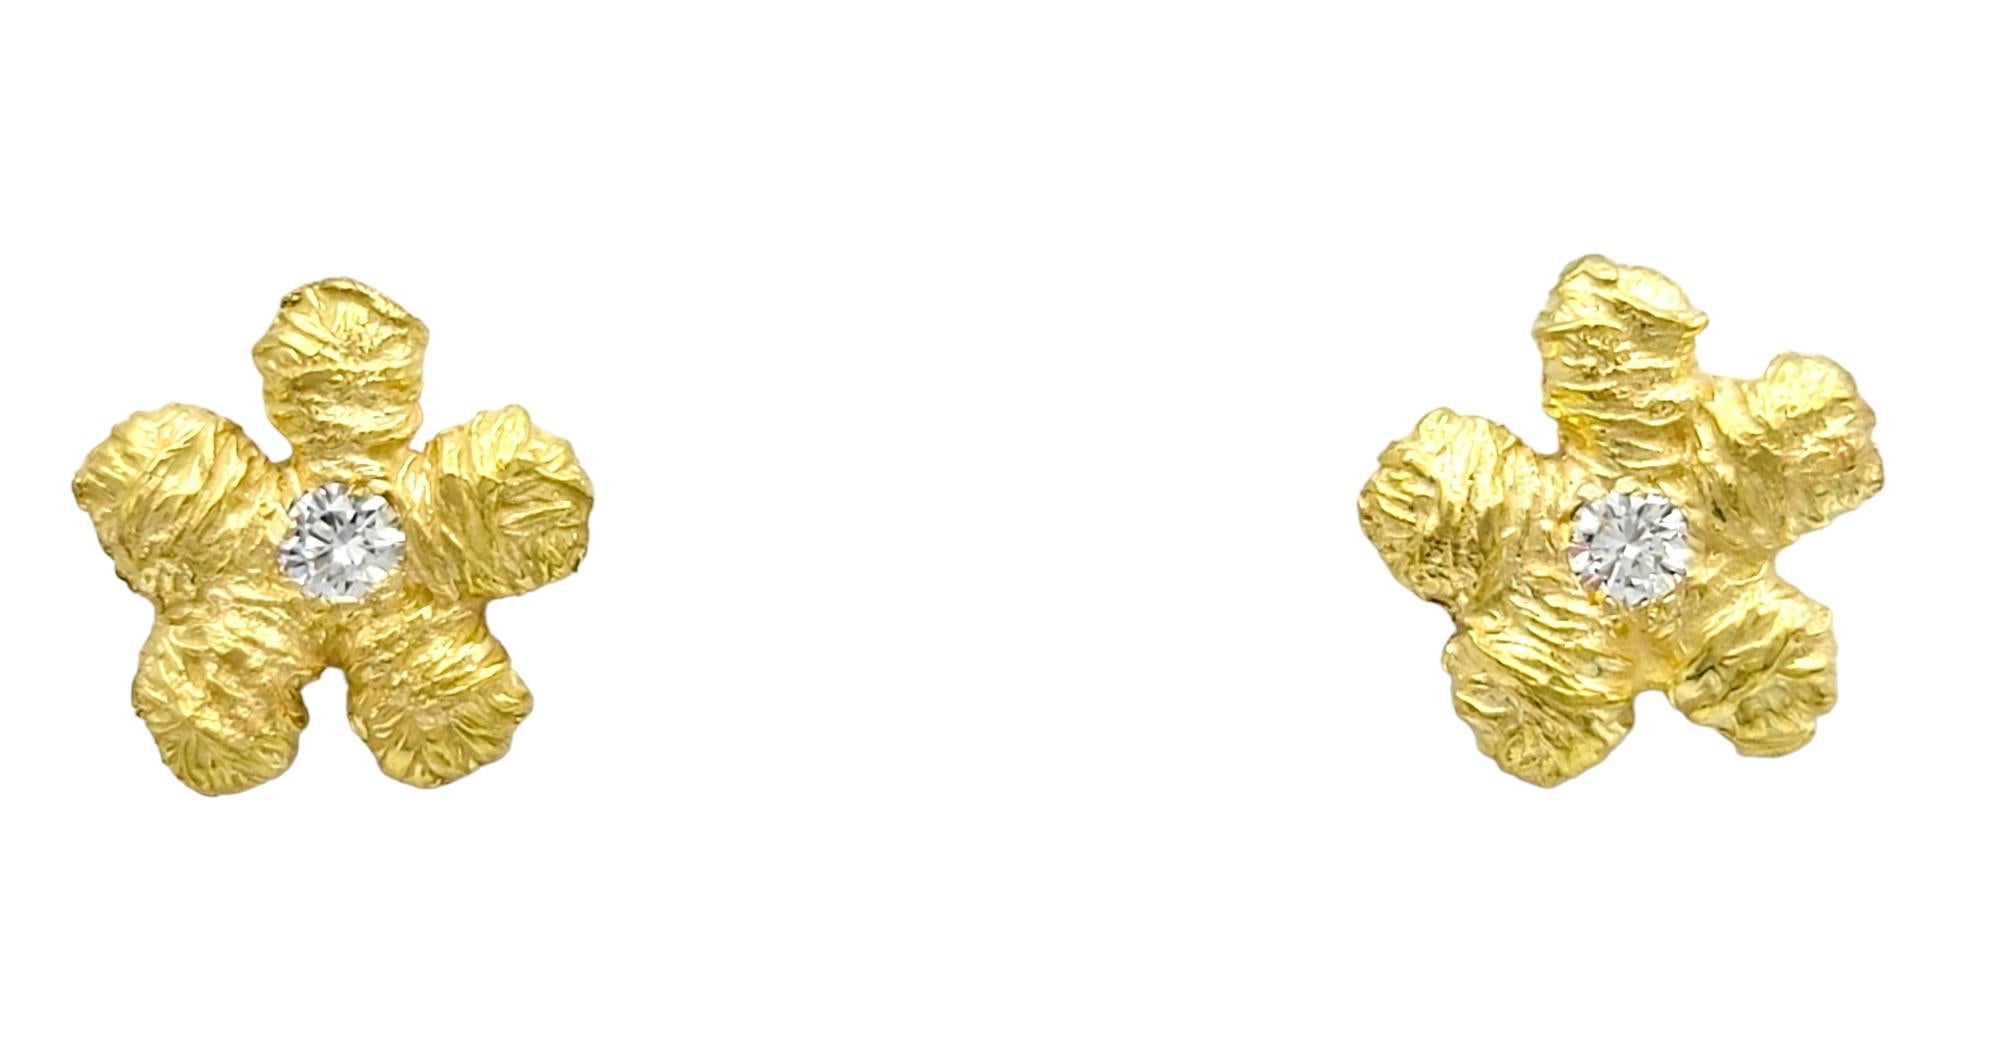 Contemporary 18 Karat Gold Diamond Flower Stud Earrings with Mismatched Hammered CZ Jackets For Sale